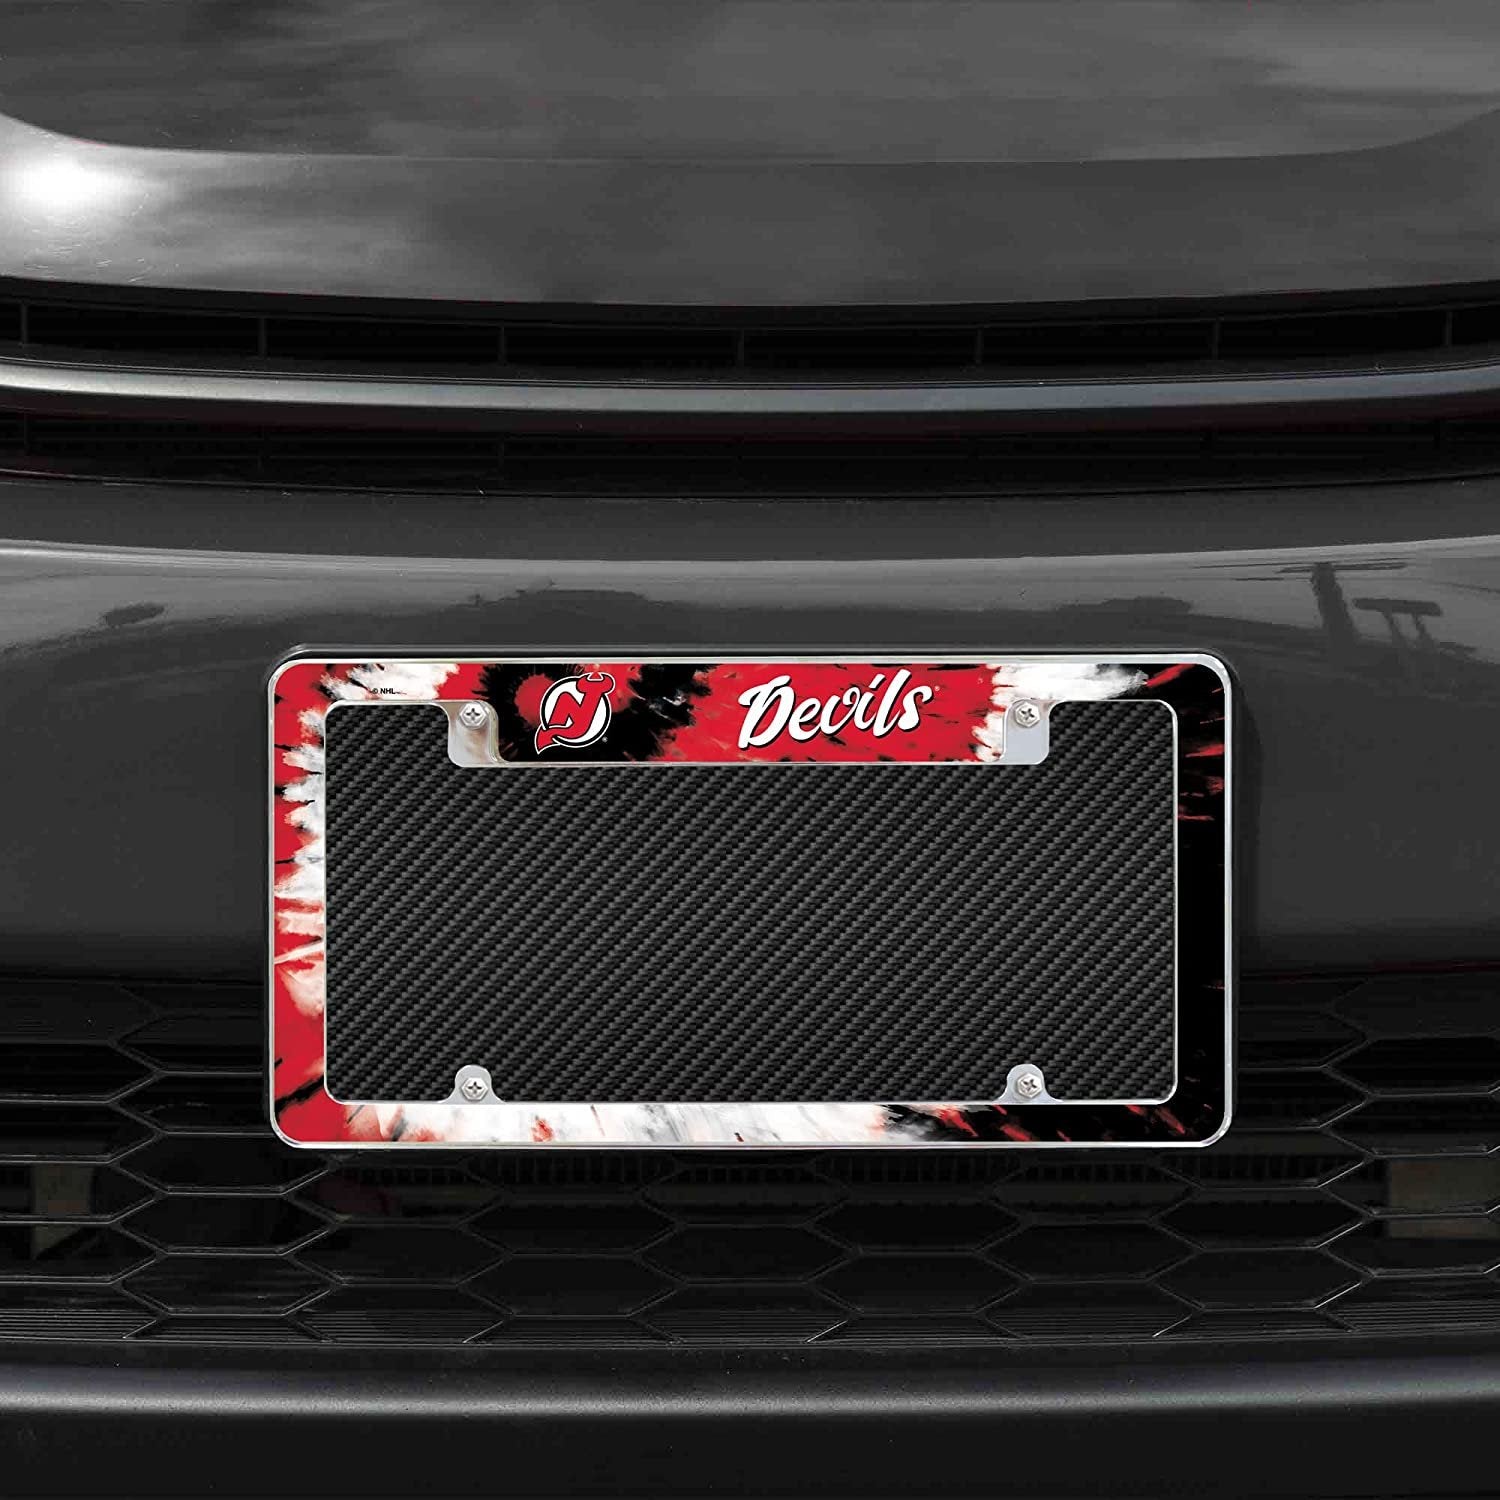 New Jersey Devils Metal License Plate Frame Chrome Tag Cover Tie Dye Design 6x12 Inch